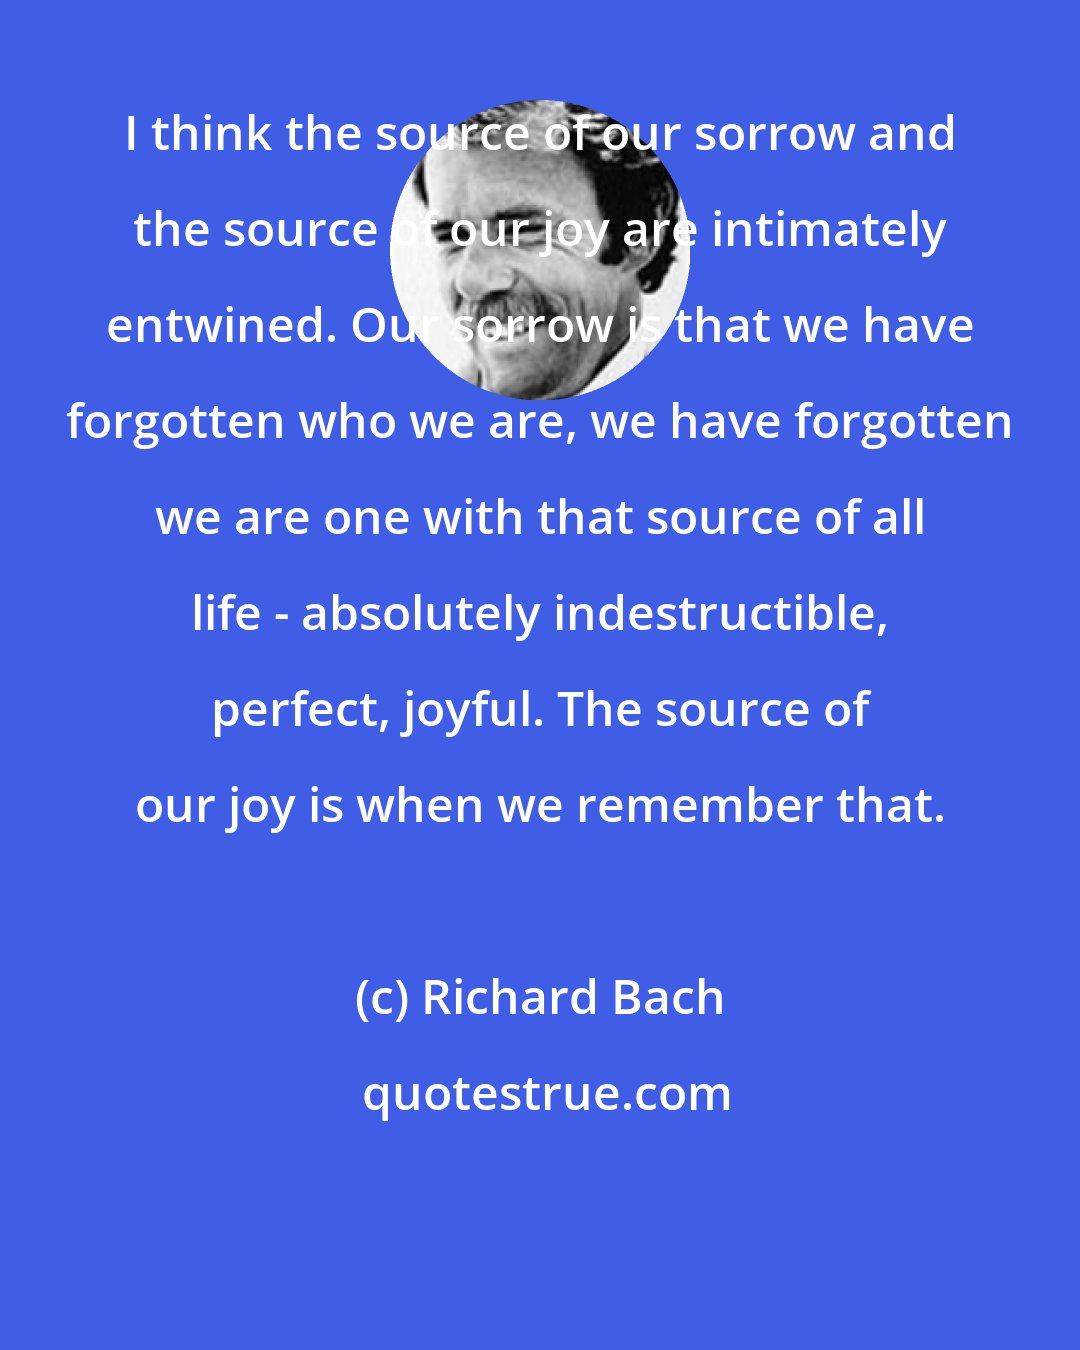 Richard Bach: I think the source of our sorrow and the source of our joy are intimately entwined. Our sorrow is that we have forgotten who we are, we have forgotten we are one with that source of all life - absolutely indestructible, perfect, joyful. The source of our joy is when we remember that.